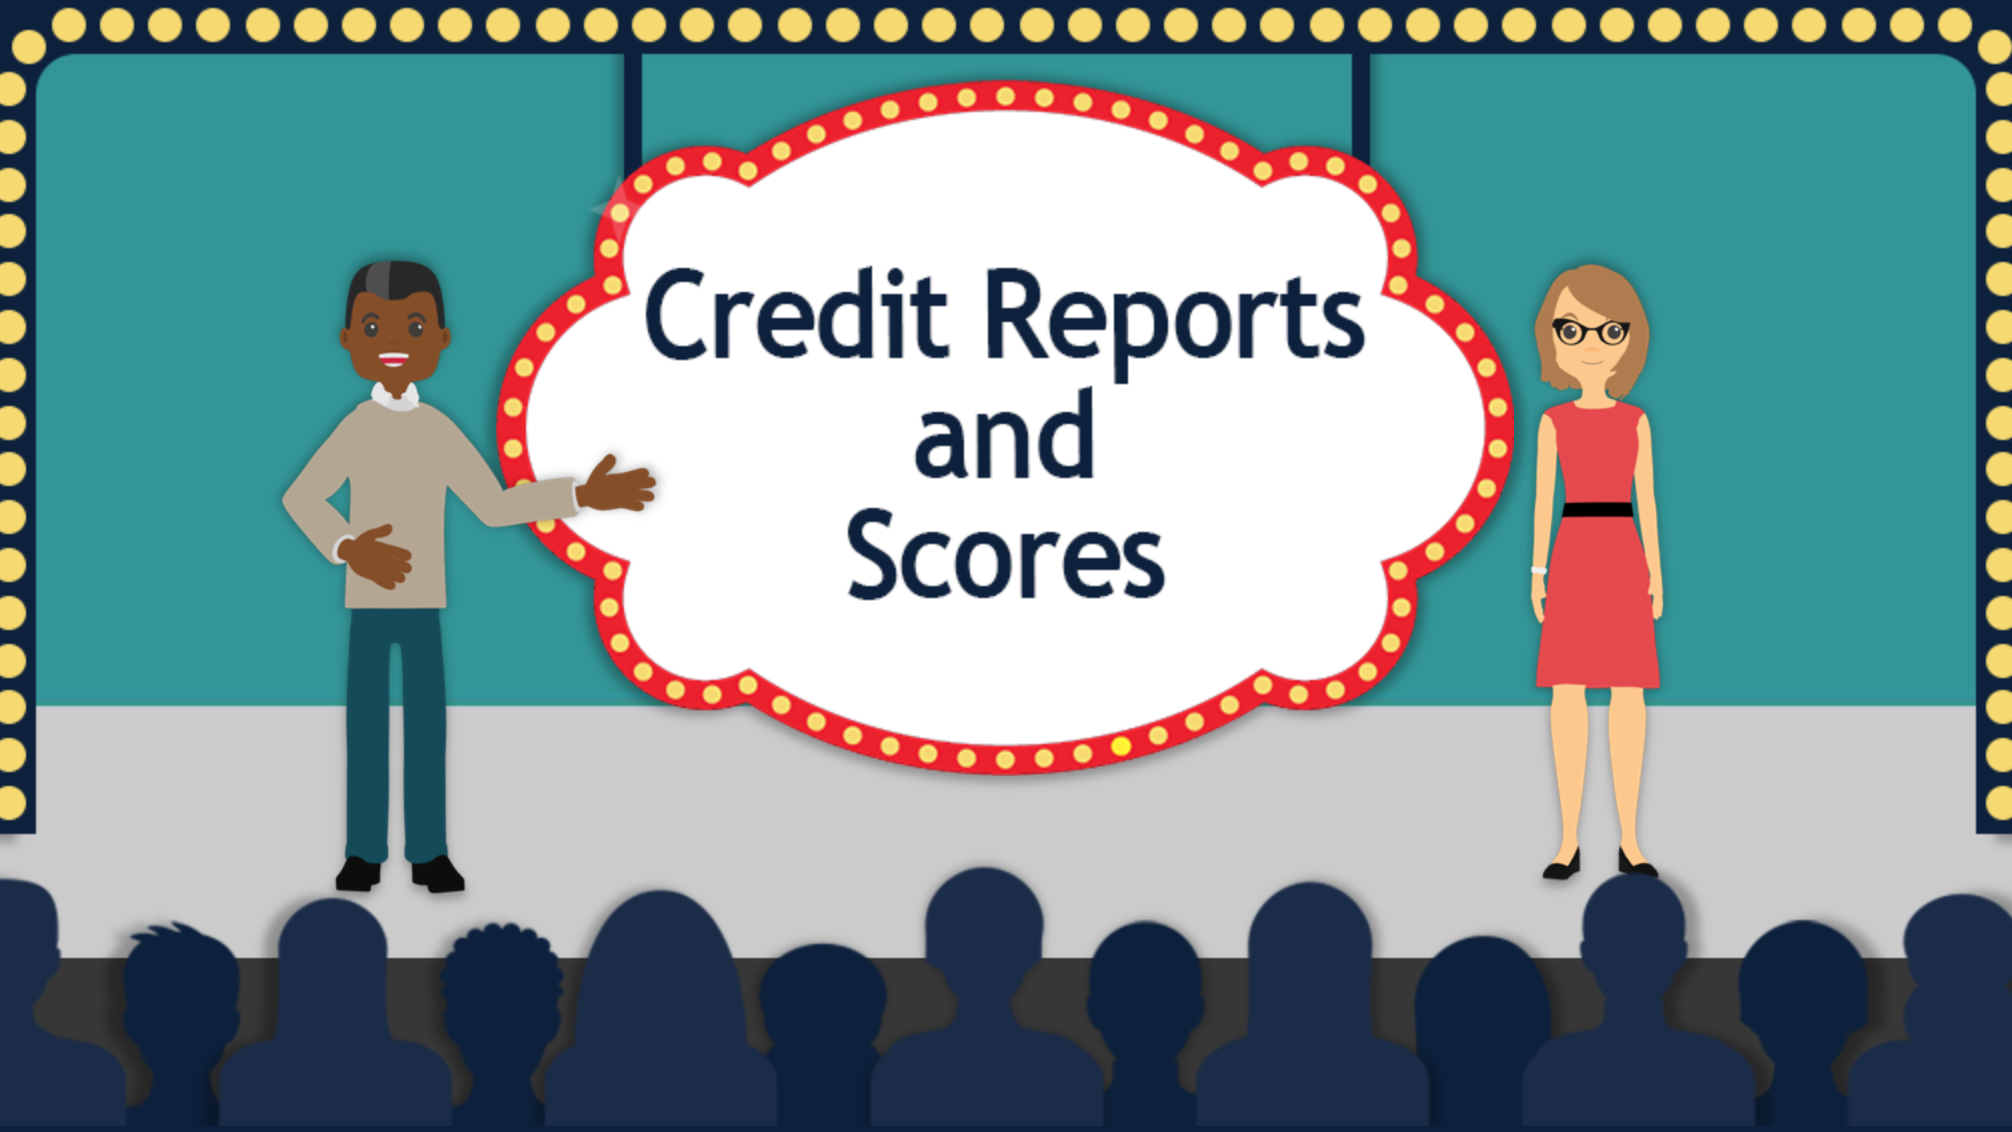 Link to FDIC's Credit Reports and Scores Online game